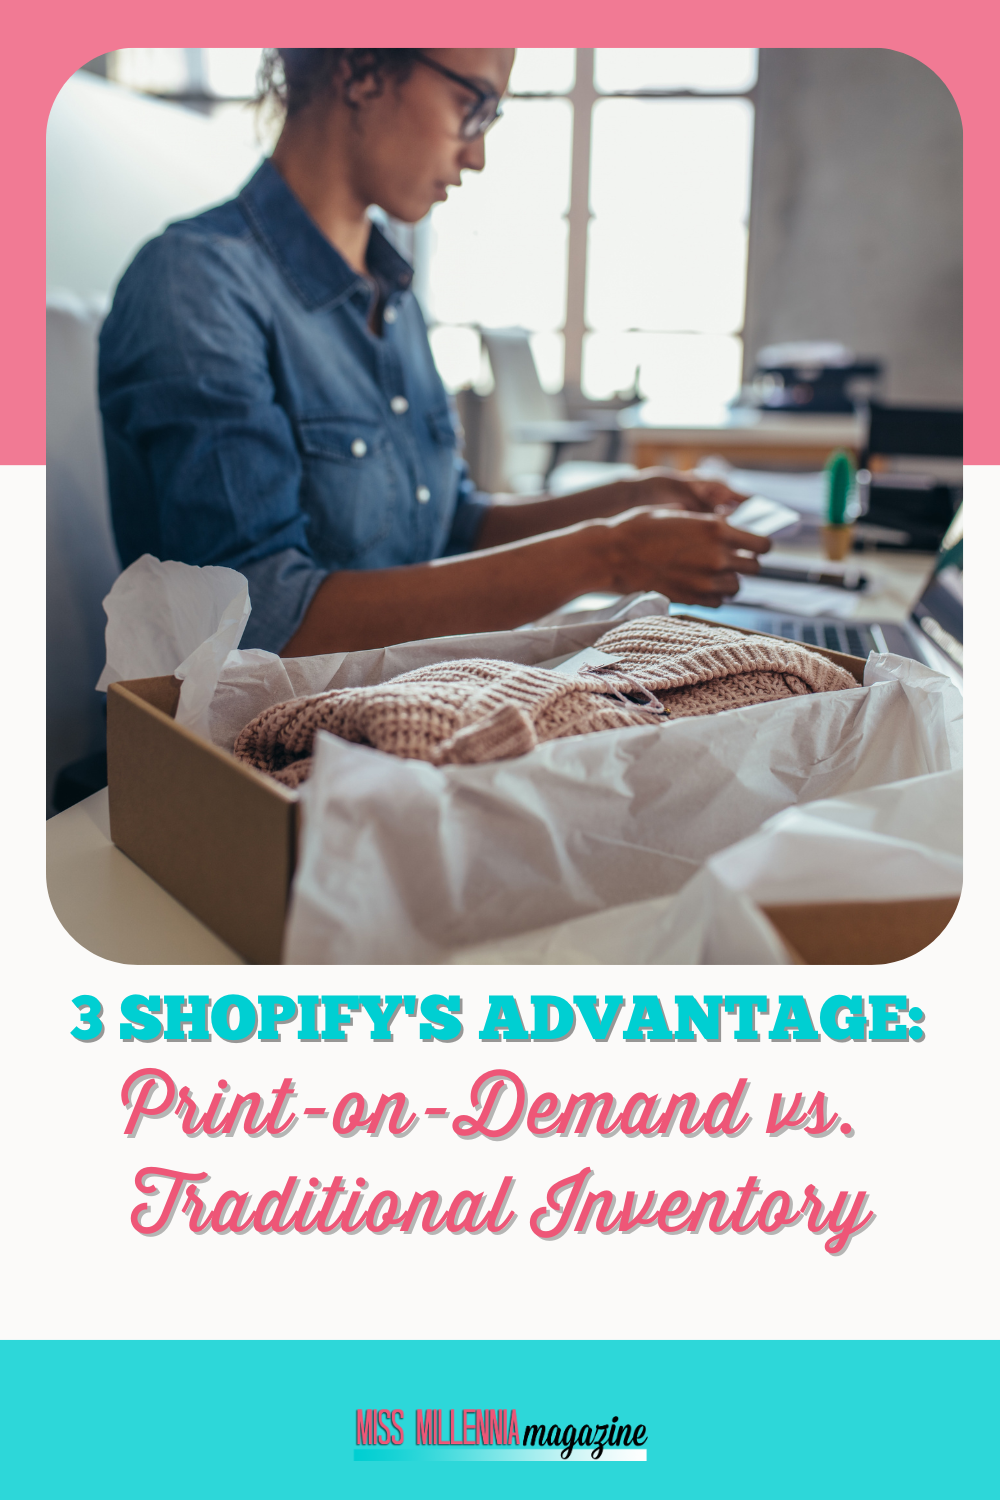 3 Shopify’s Advantage: Print-on-Demand vs. Traditional Inventory